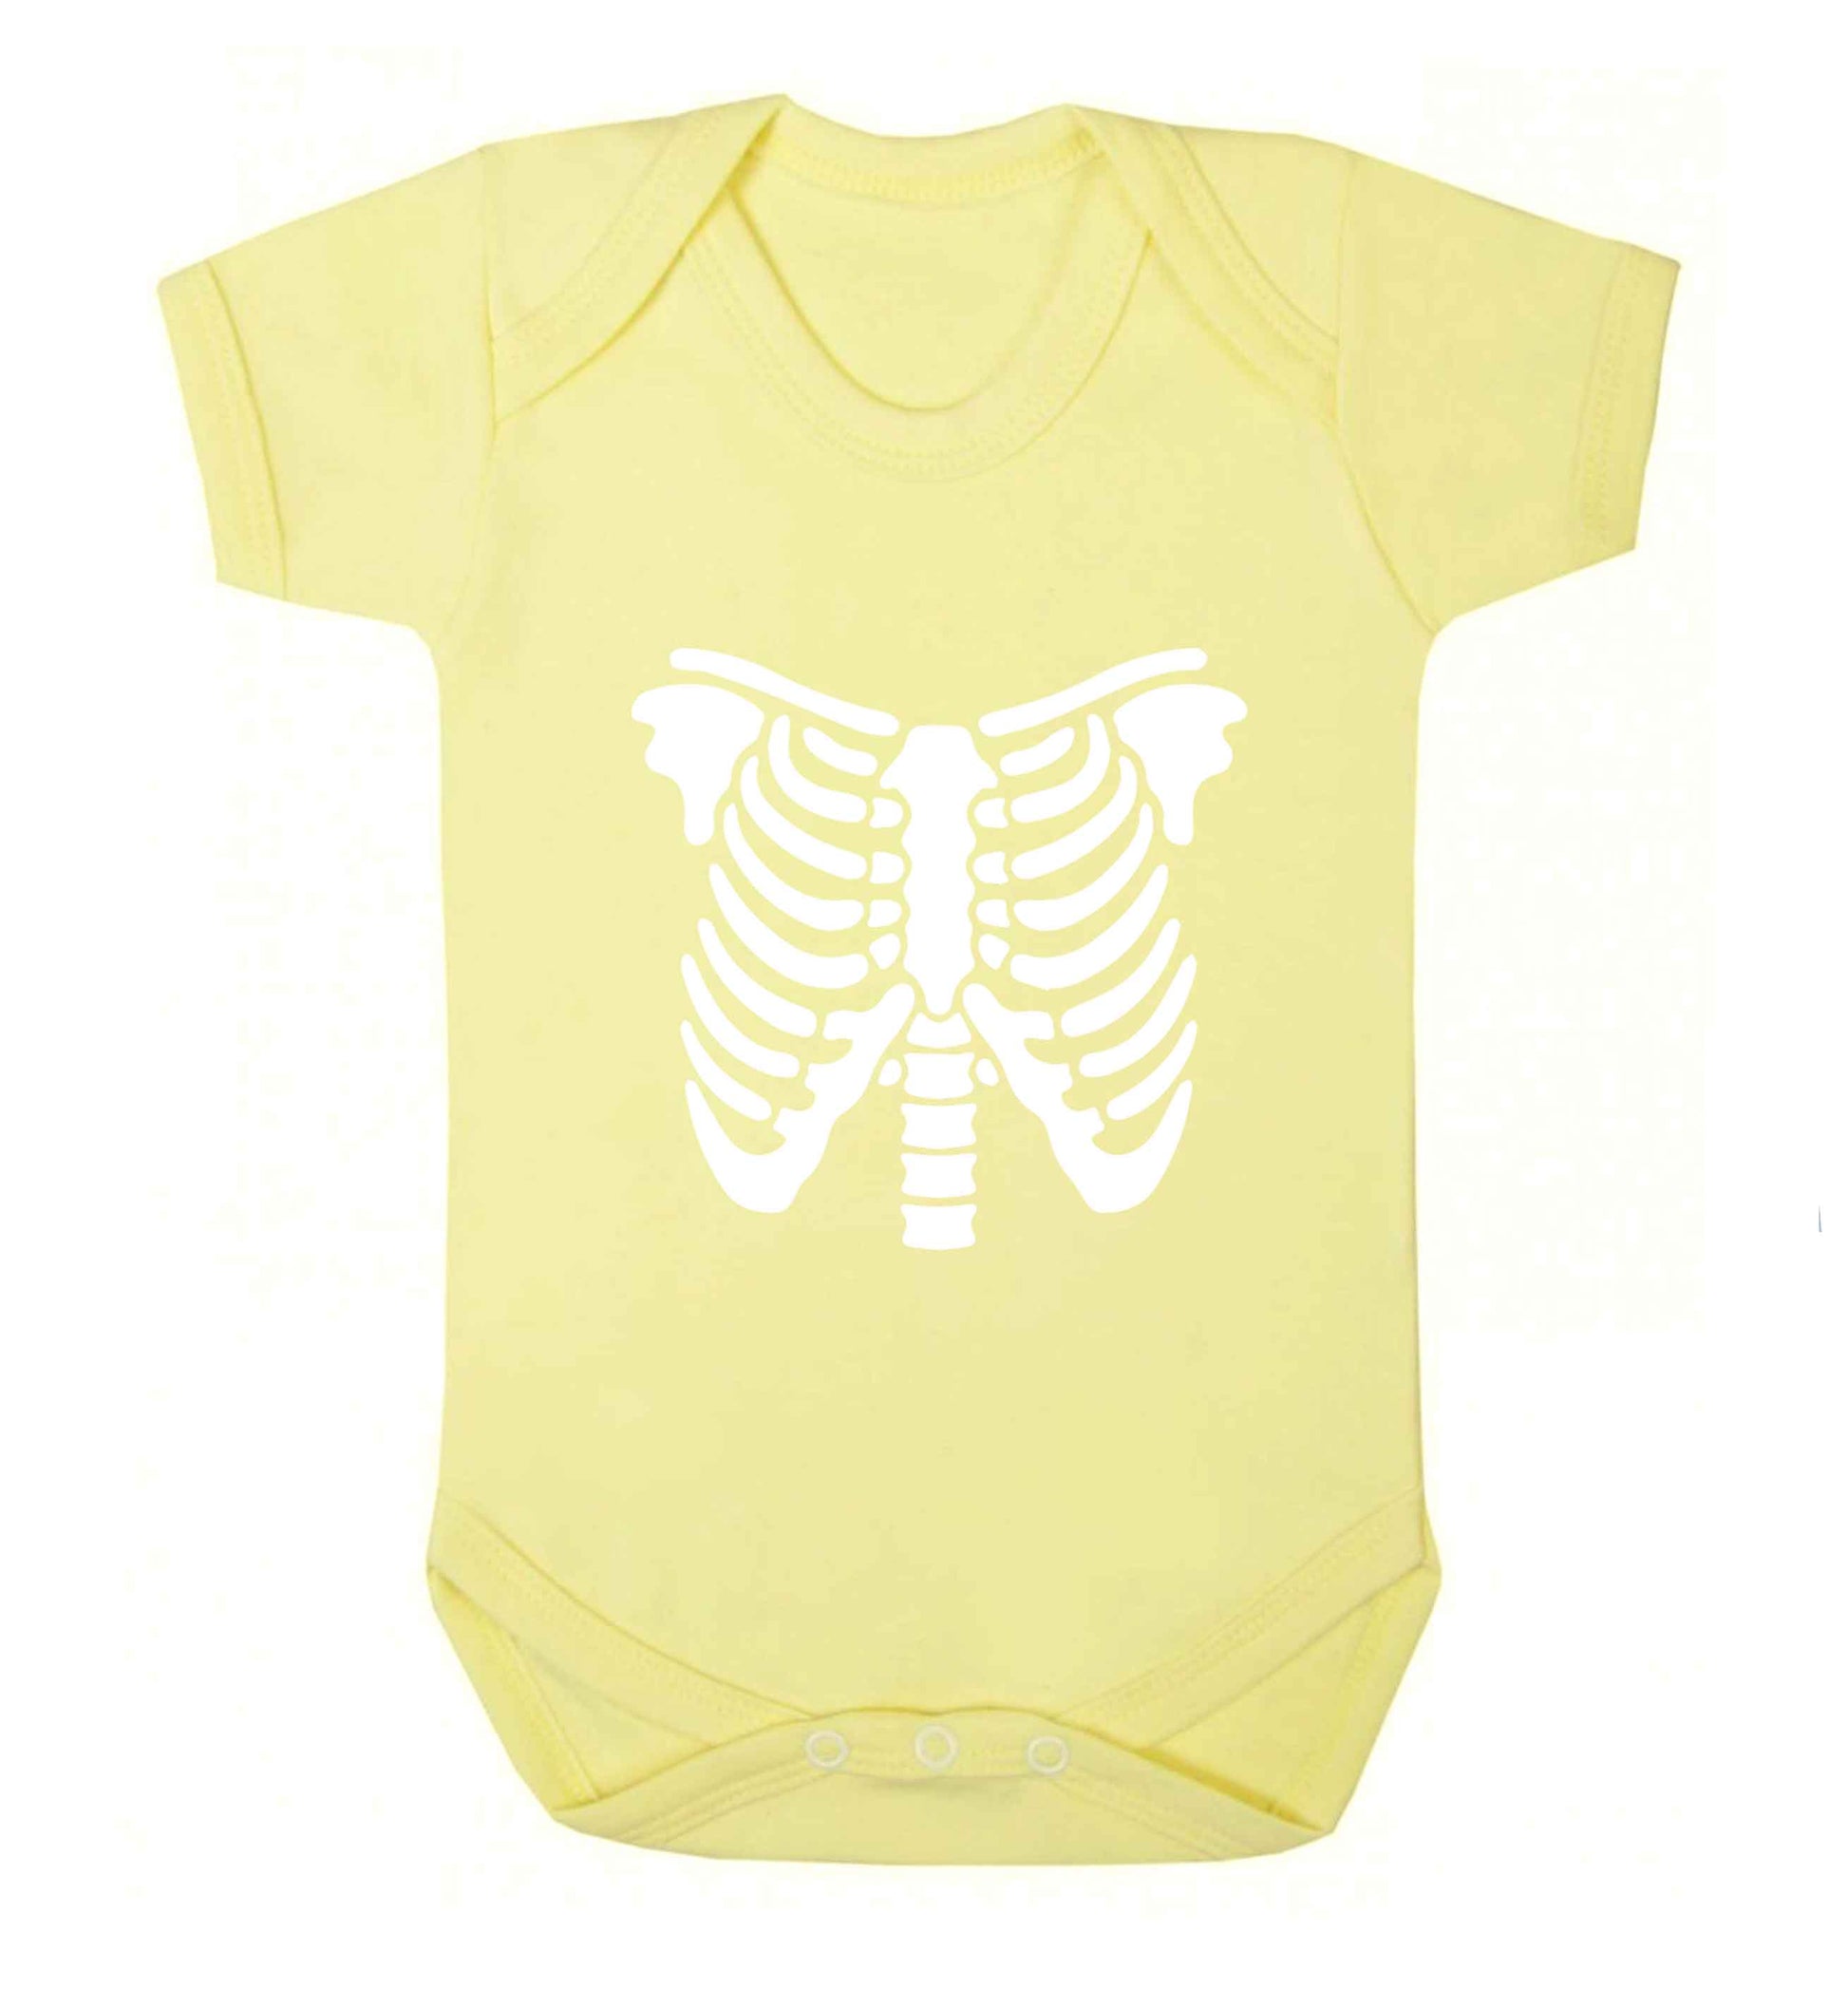 Skeleton ribcage baby vest pale yellow 18-24 months